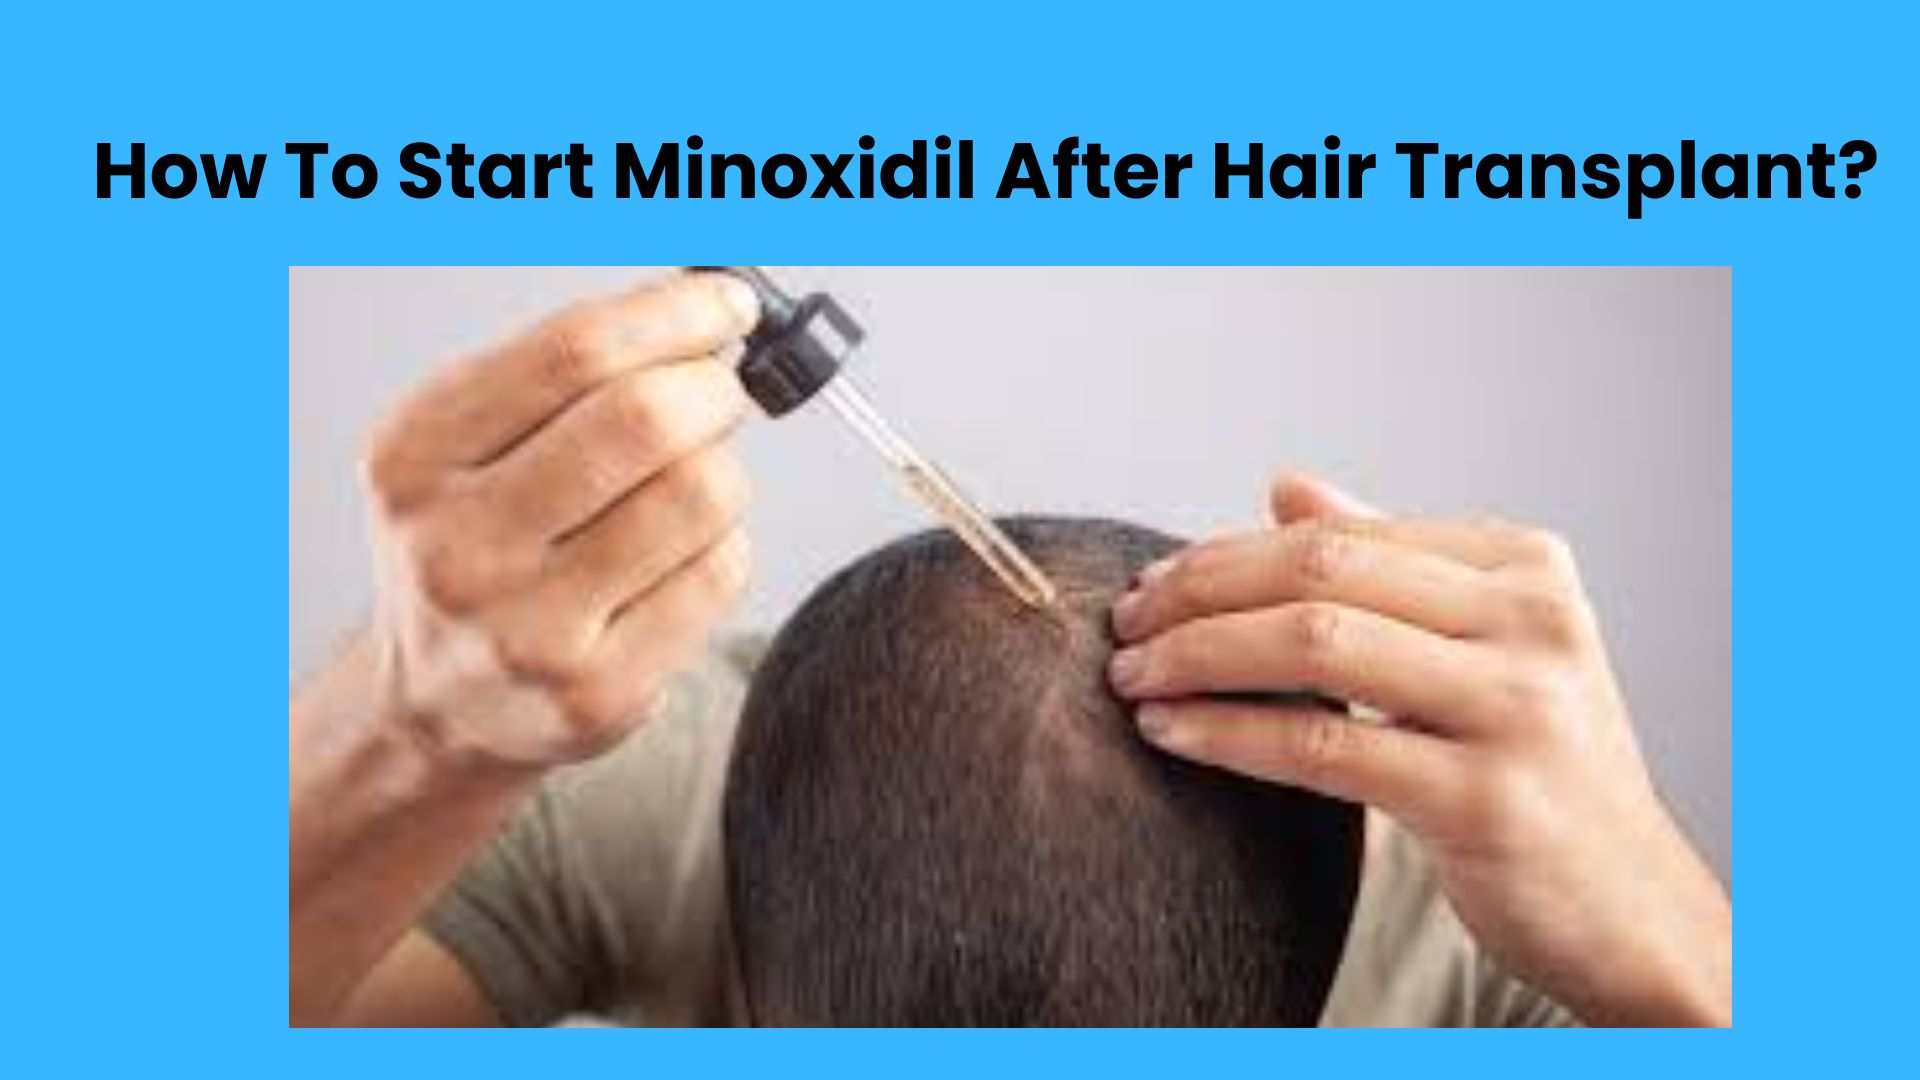 How To Start Minoxidil After Hair Transplant?